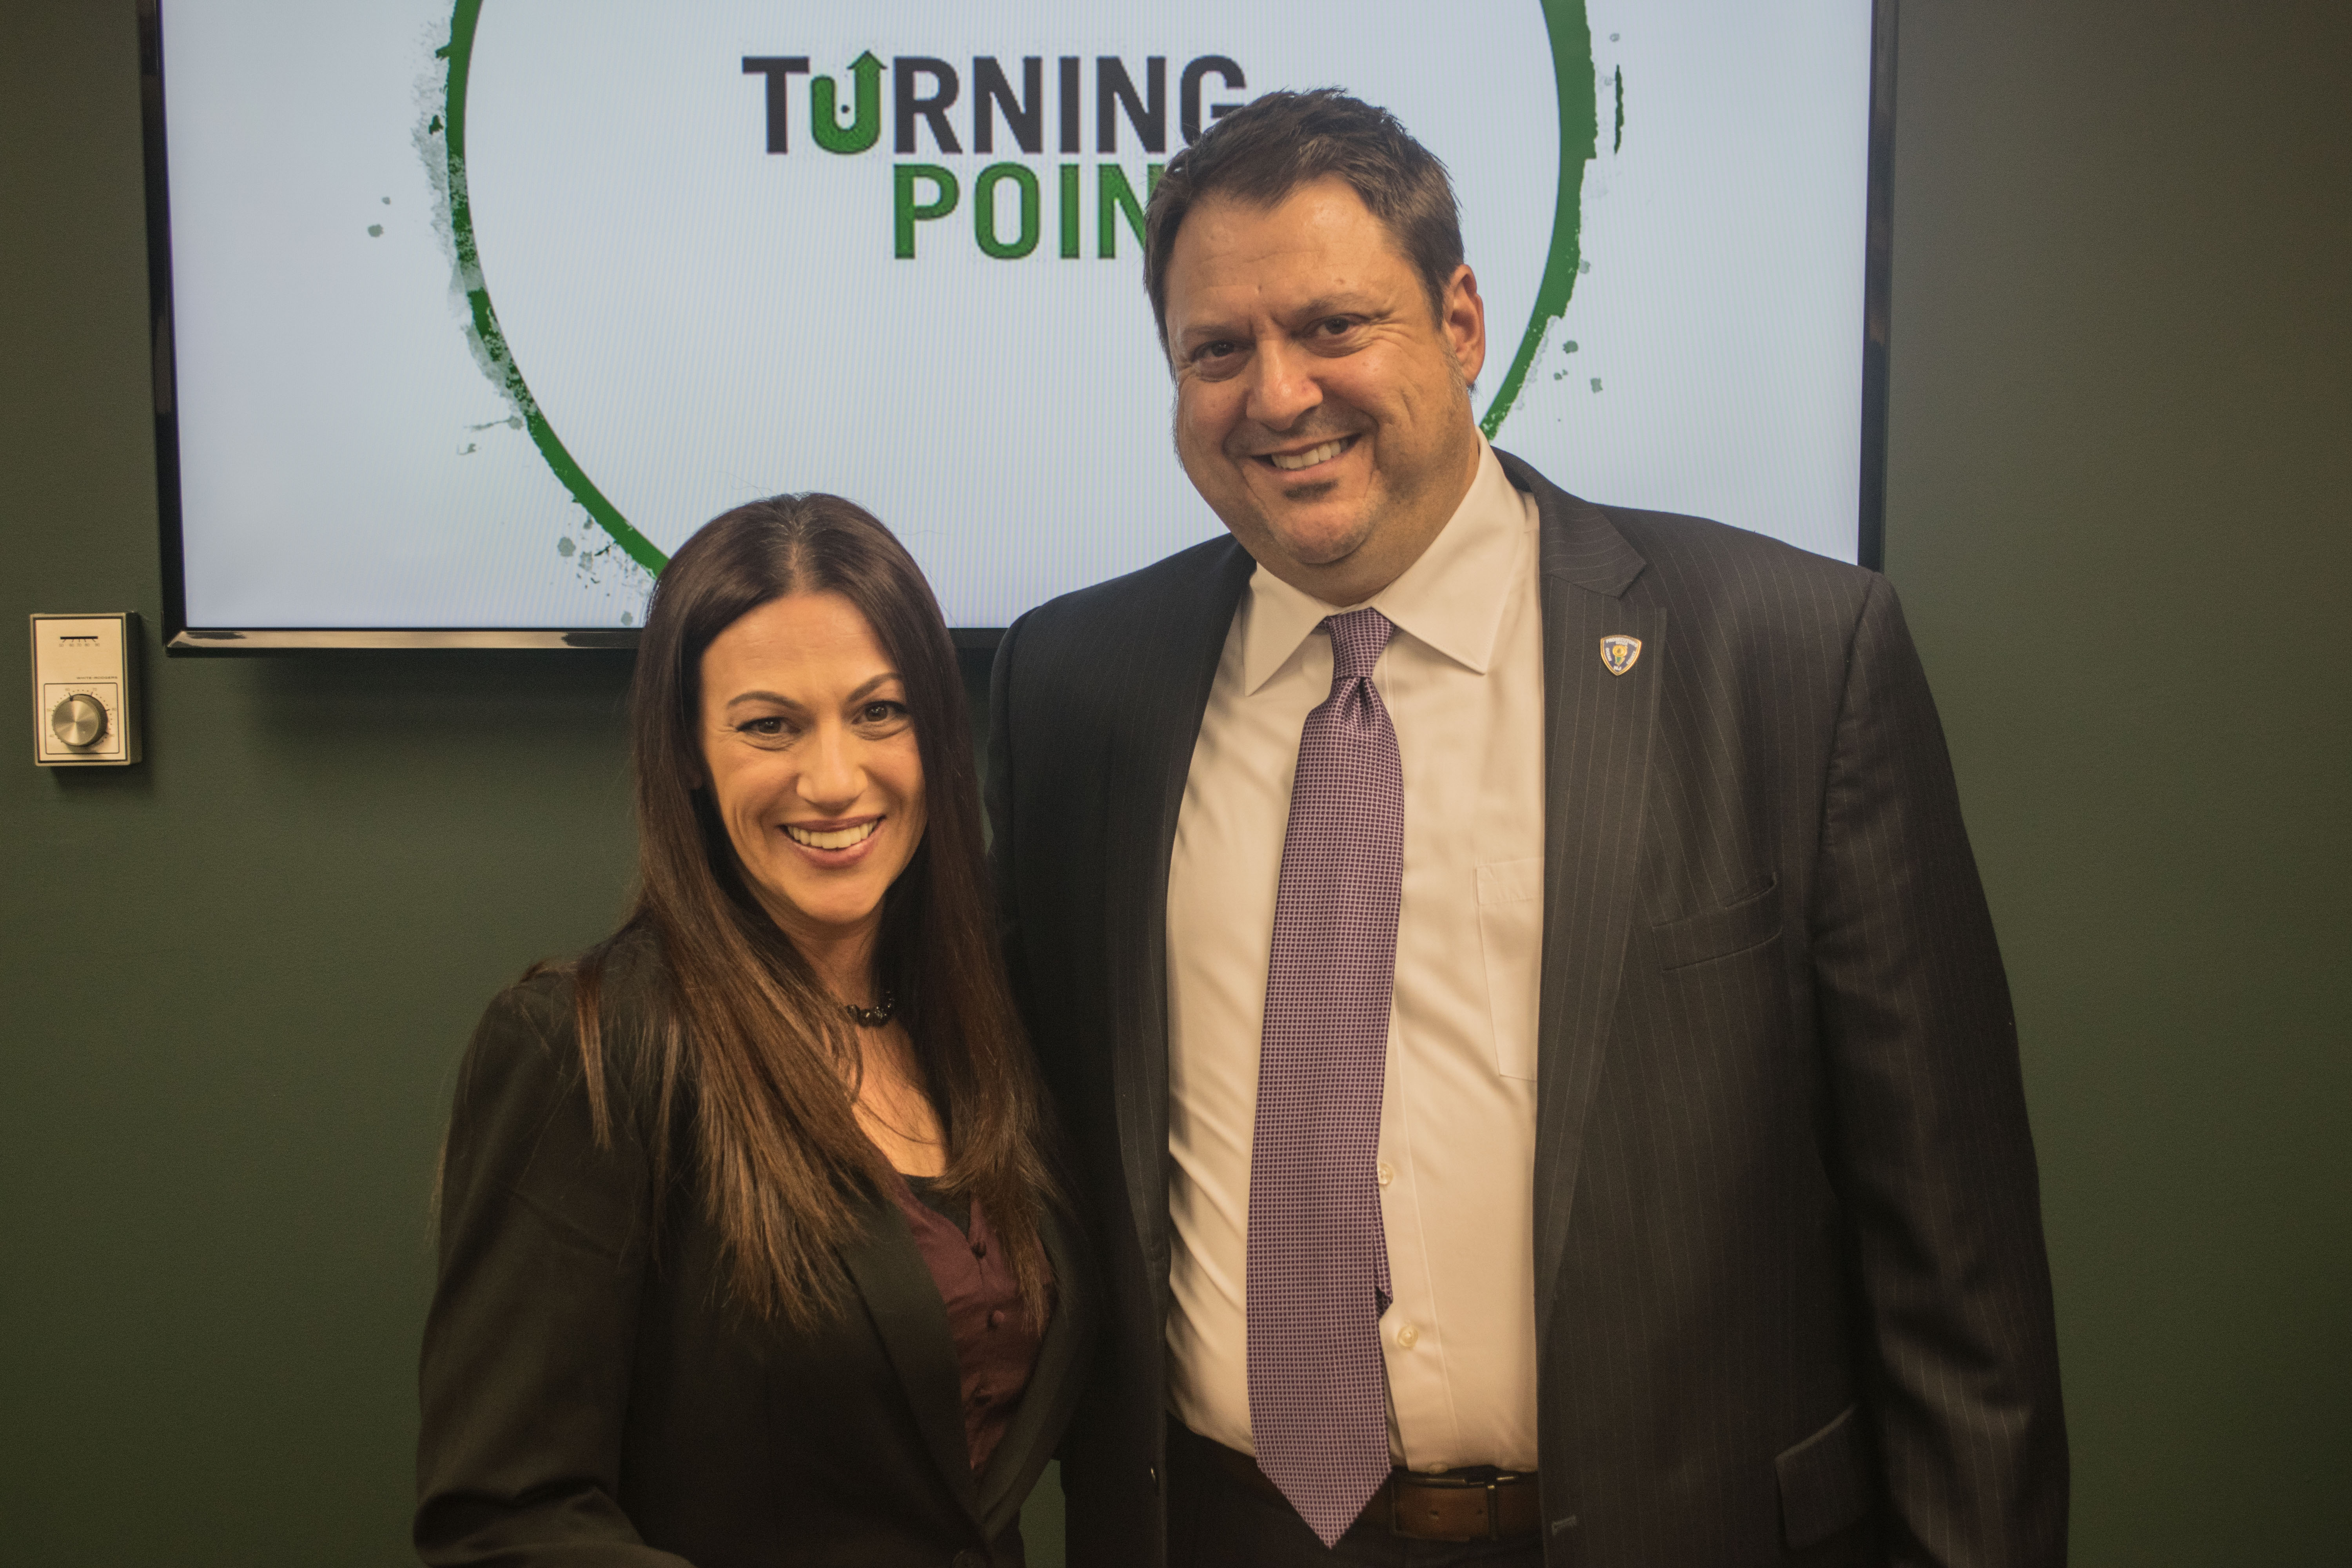 Ocean County Prosecutor Bradley Billhimer and Holly, who successfully completed Turning Point's program. (Photo: Daniel Nee)